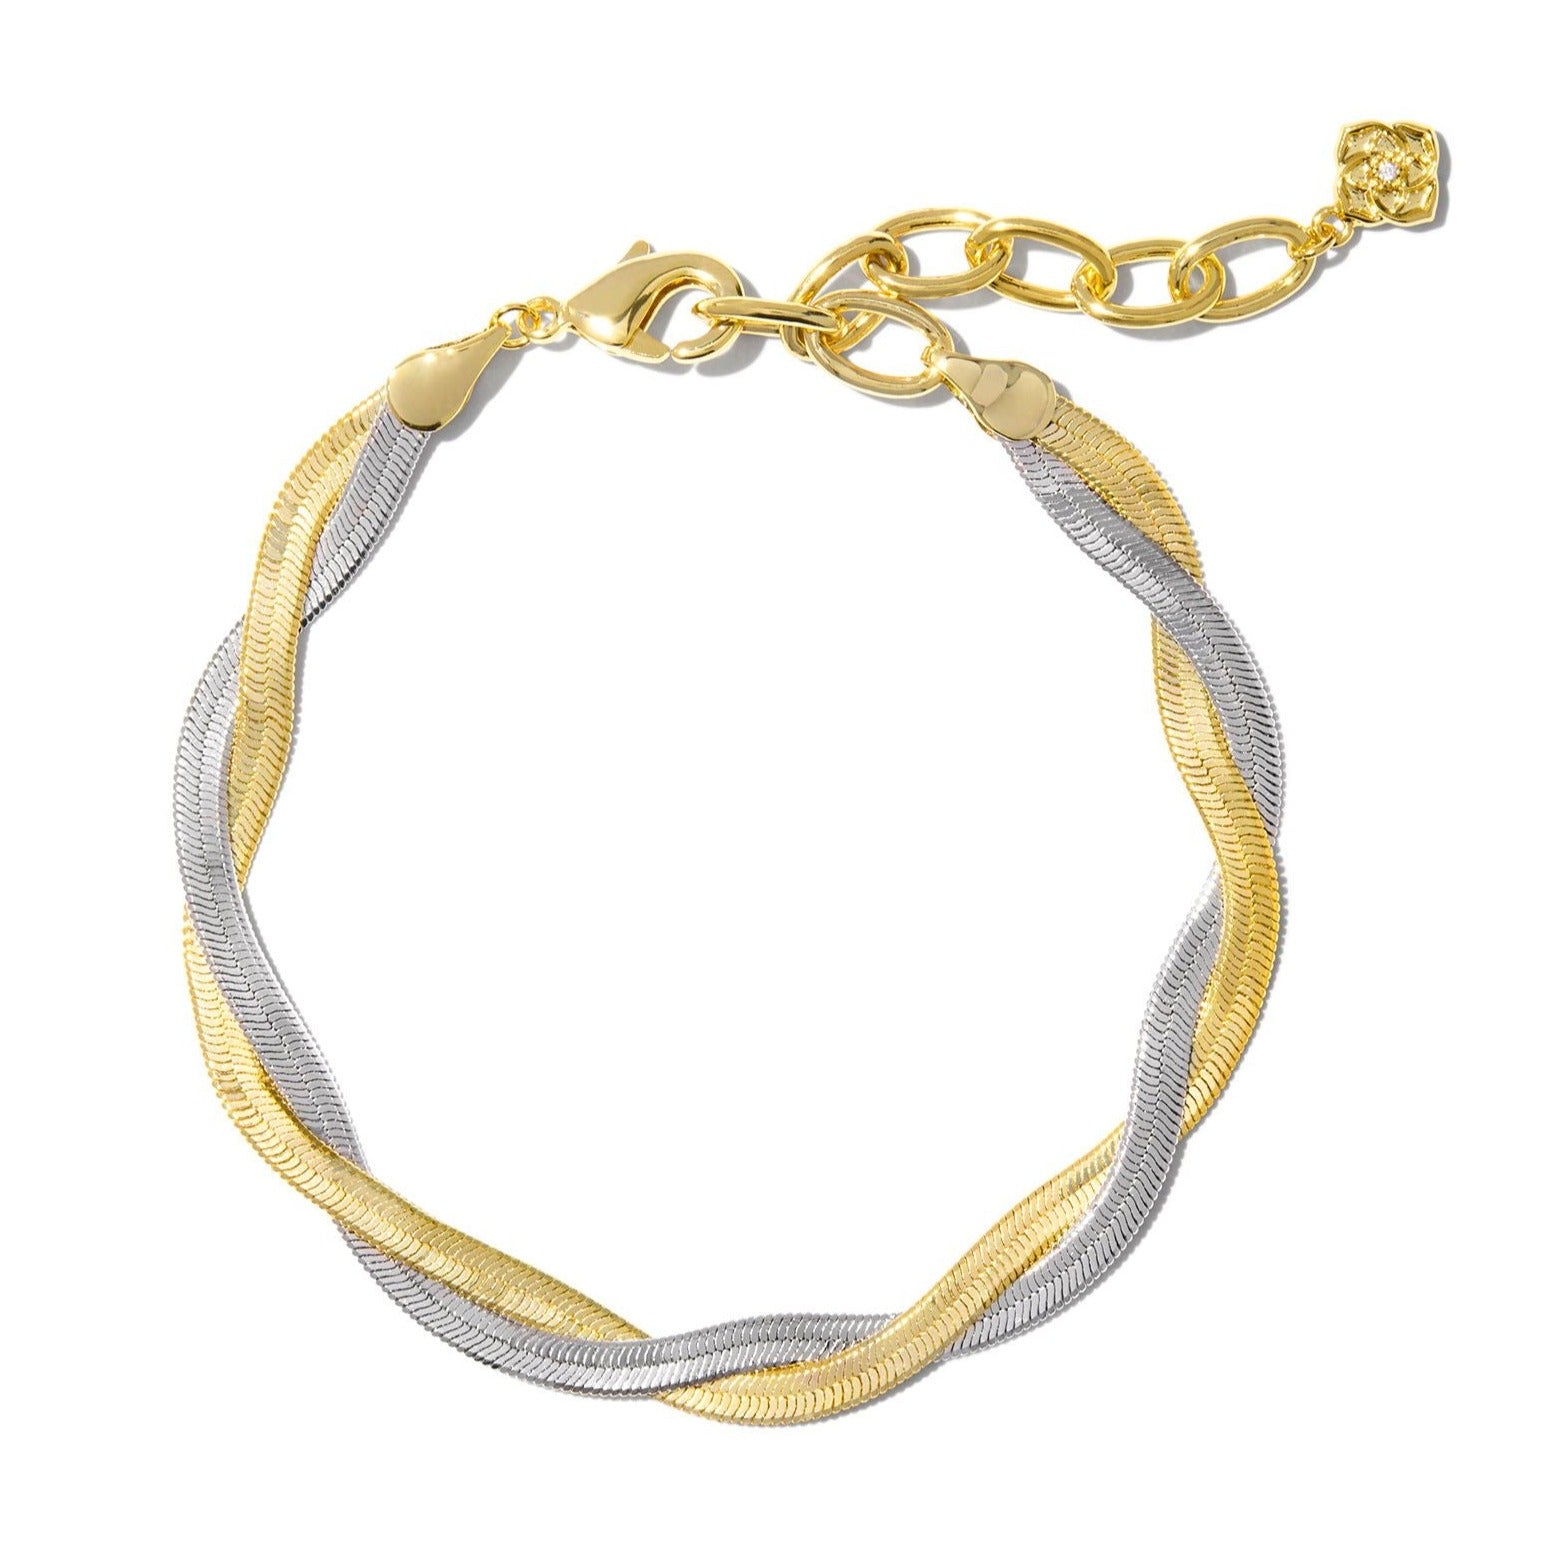 Kendra Scott | Hayden Chain Bracelet in Mixed Metal - Giddy Up Glamour Boutique